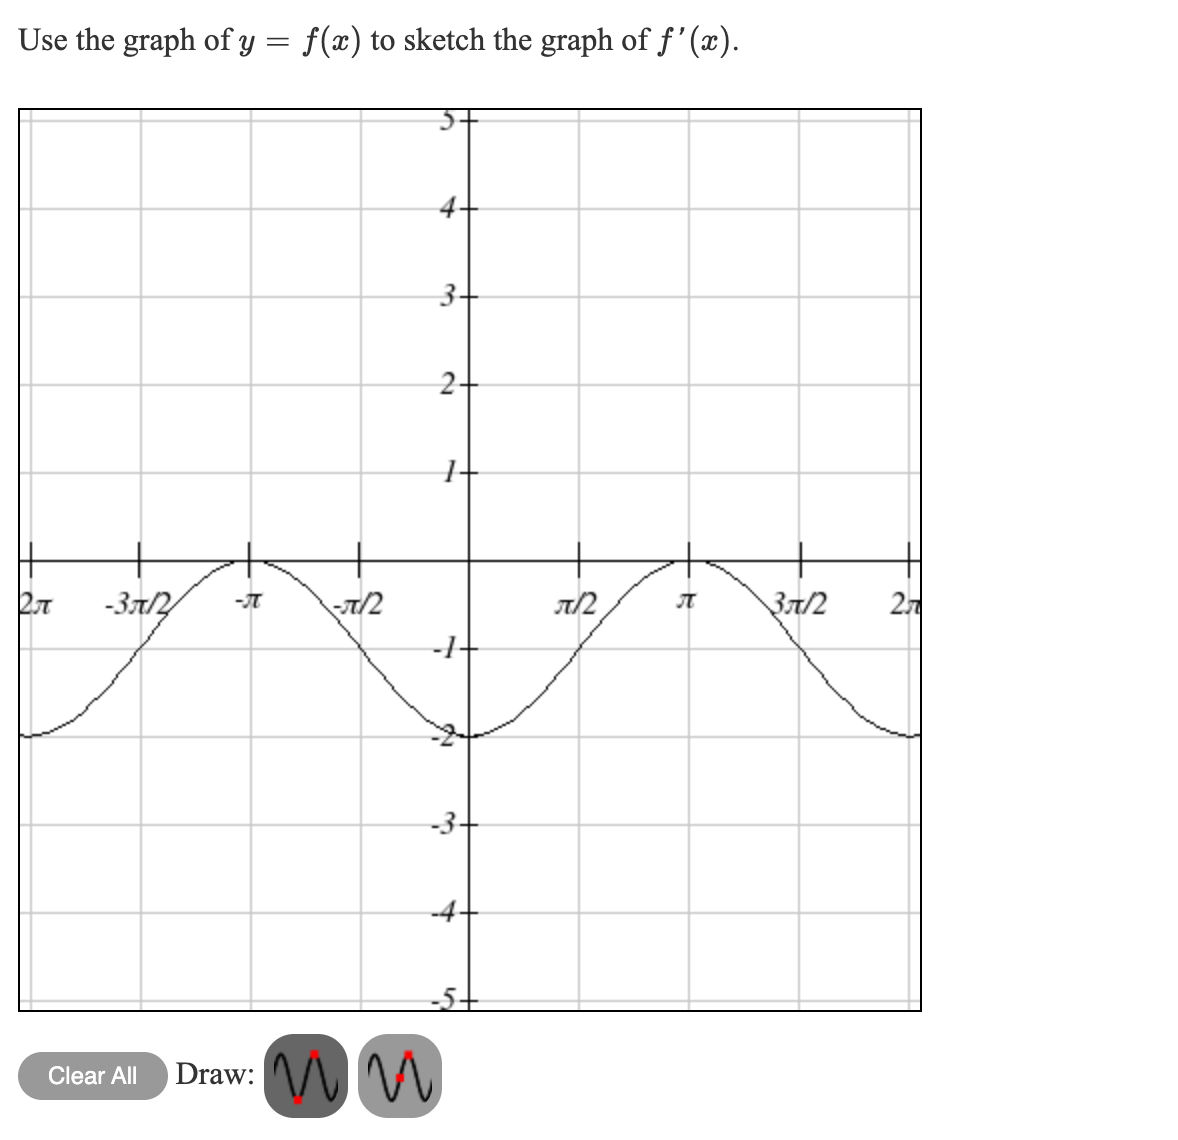 Use the graph of y = f(x) to sketch the graph of f'(x).
3-
2-
-37/2
-IT
37/2
2.7
-1-
-3-
-4-
-5+
Draw: VM
Clear All
